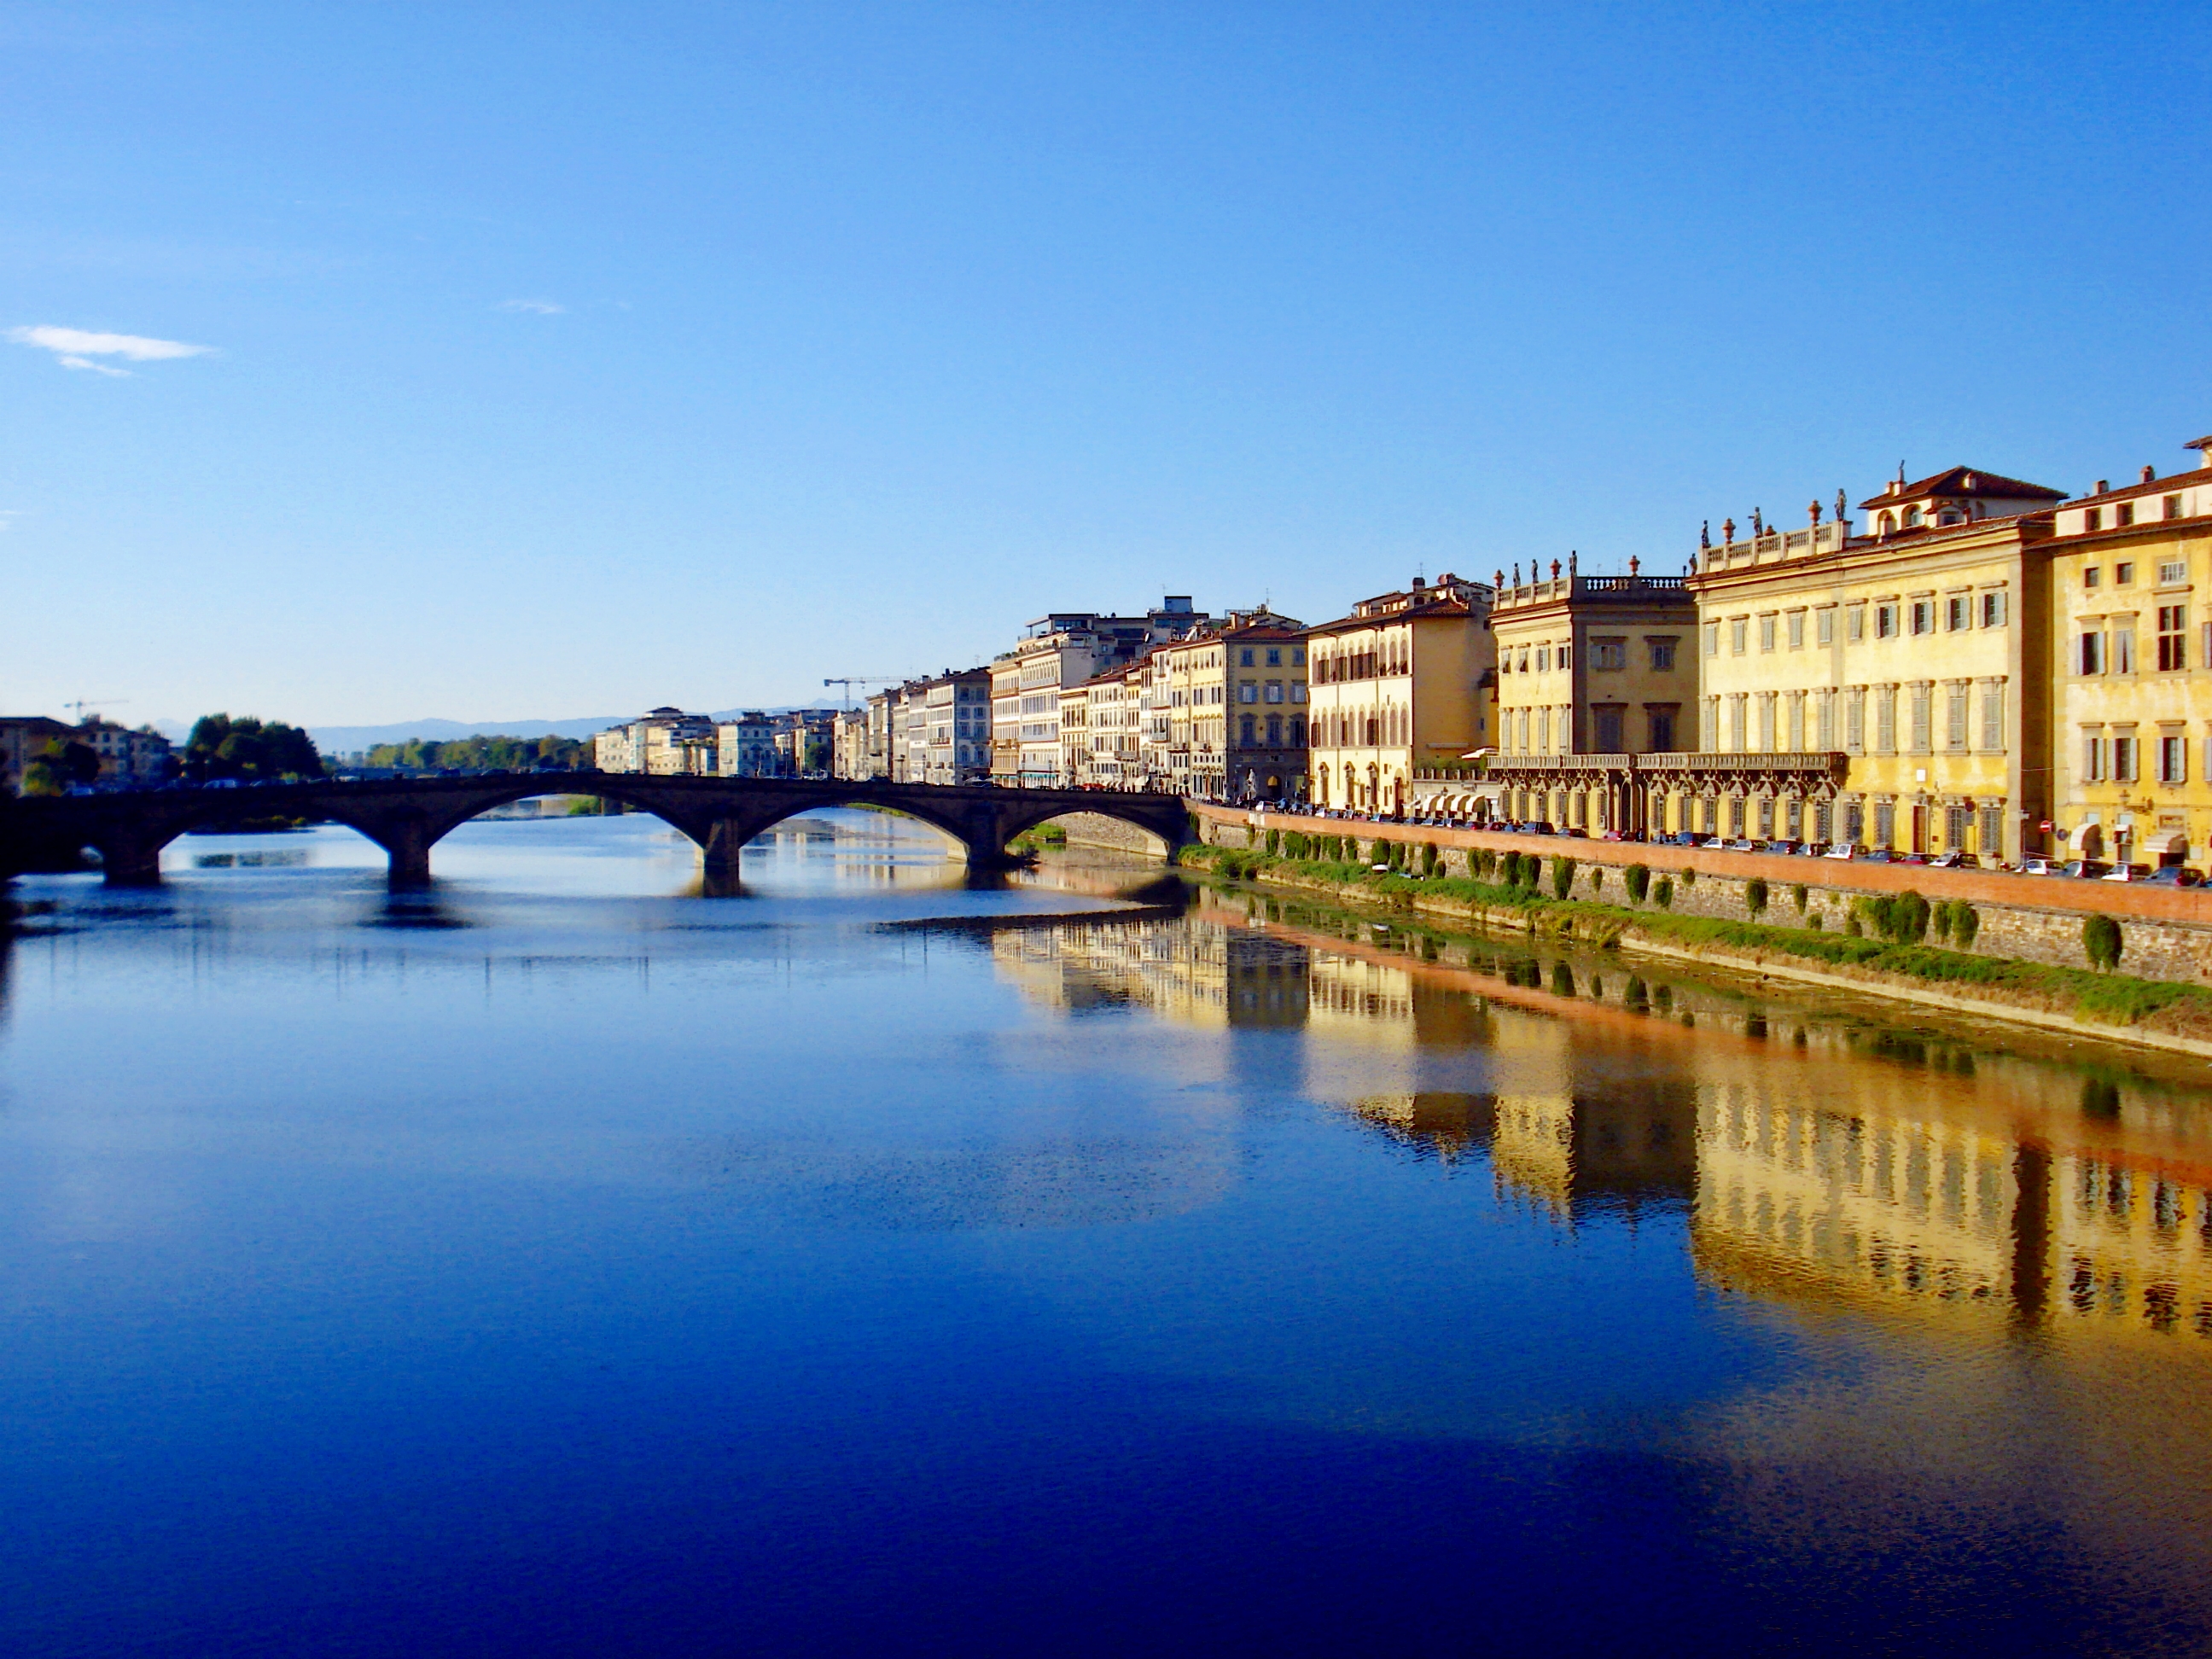 The river Arno by nuvole90 on DeviantArt